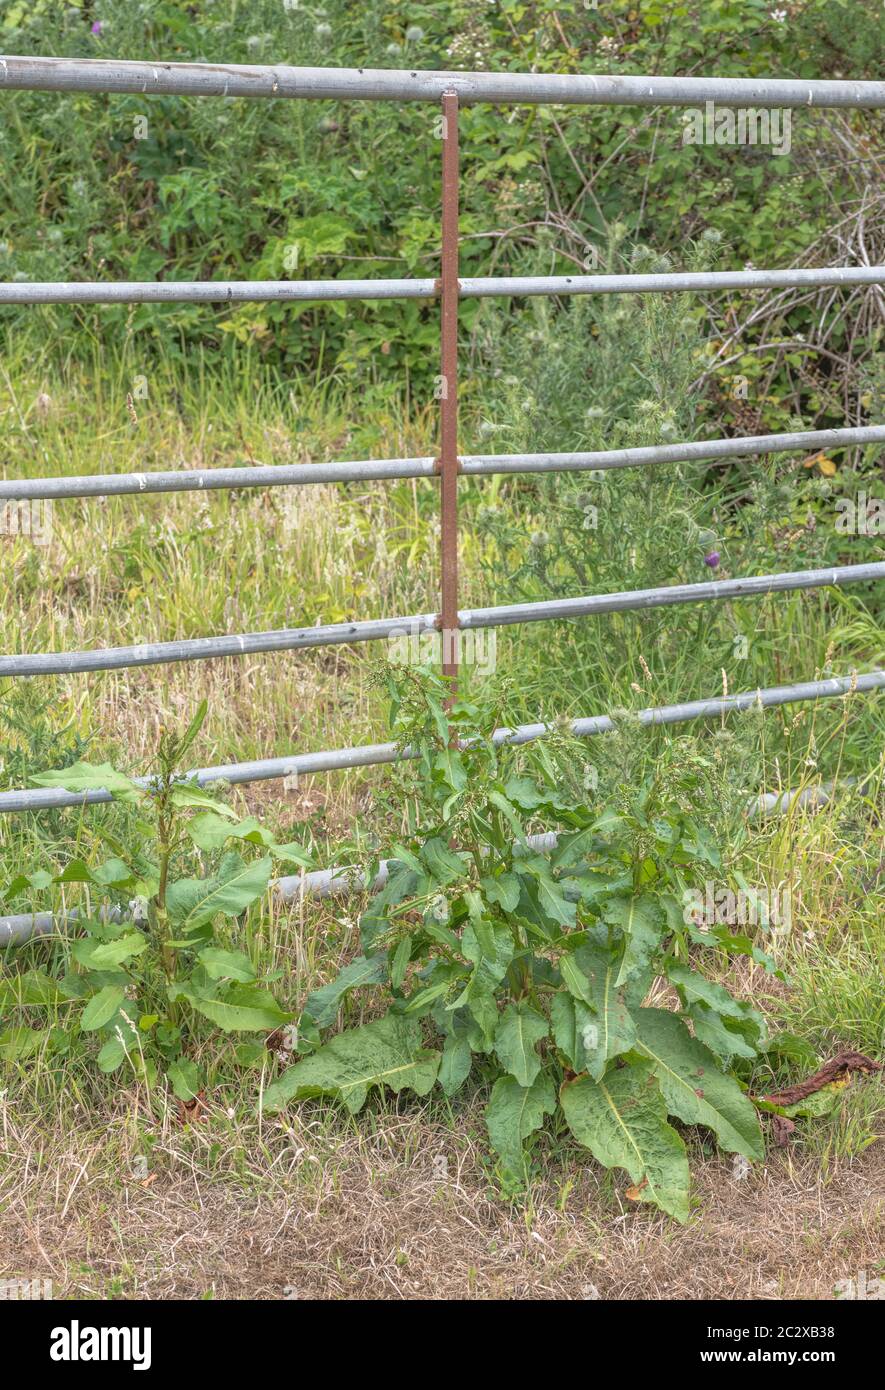 Open farmyard metal gate with Broad-Leaved Dock / Rumex obtusifolius growing beside. This is the Dock used to rub nettle stings. Stock Photo